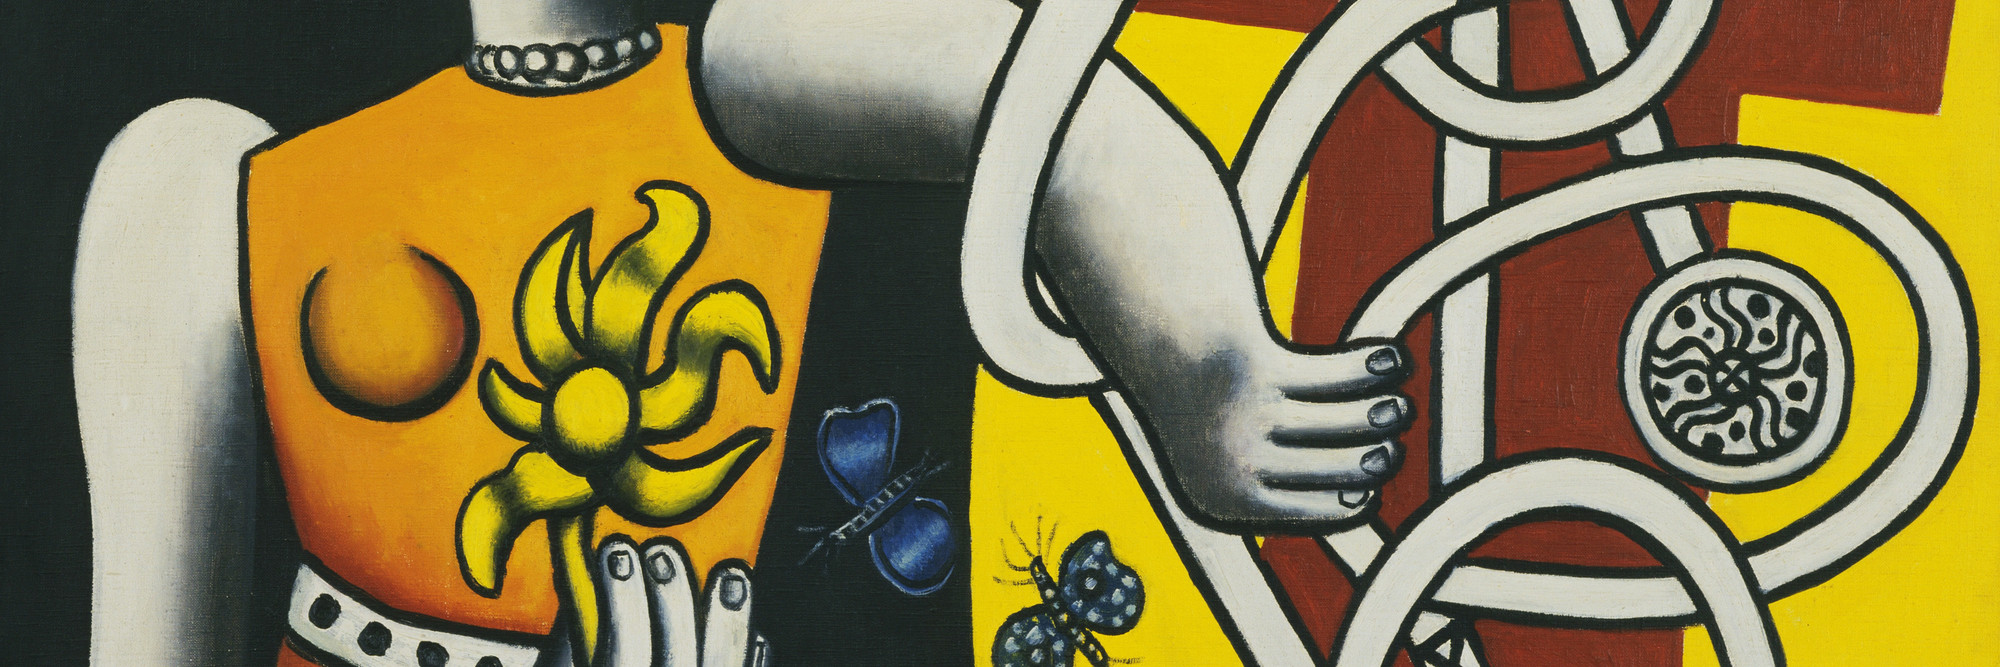 Fernand Léger. La Grande Julie (Big Julie). 1945. Oil on canvas. 44 × 50 1/8″ (111.8 × 127.3 cm). The Museum of Modern Art, New York. Acquired through the Lillie P. Bliss Bequest, 1945. Photograph © 1998 The Museum of Modern Art, New York. © Estate of Fernand Léger/Artists Rights Society (ARS), N.Y.